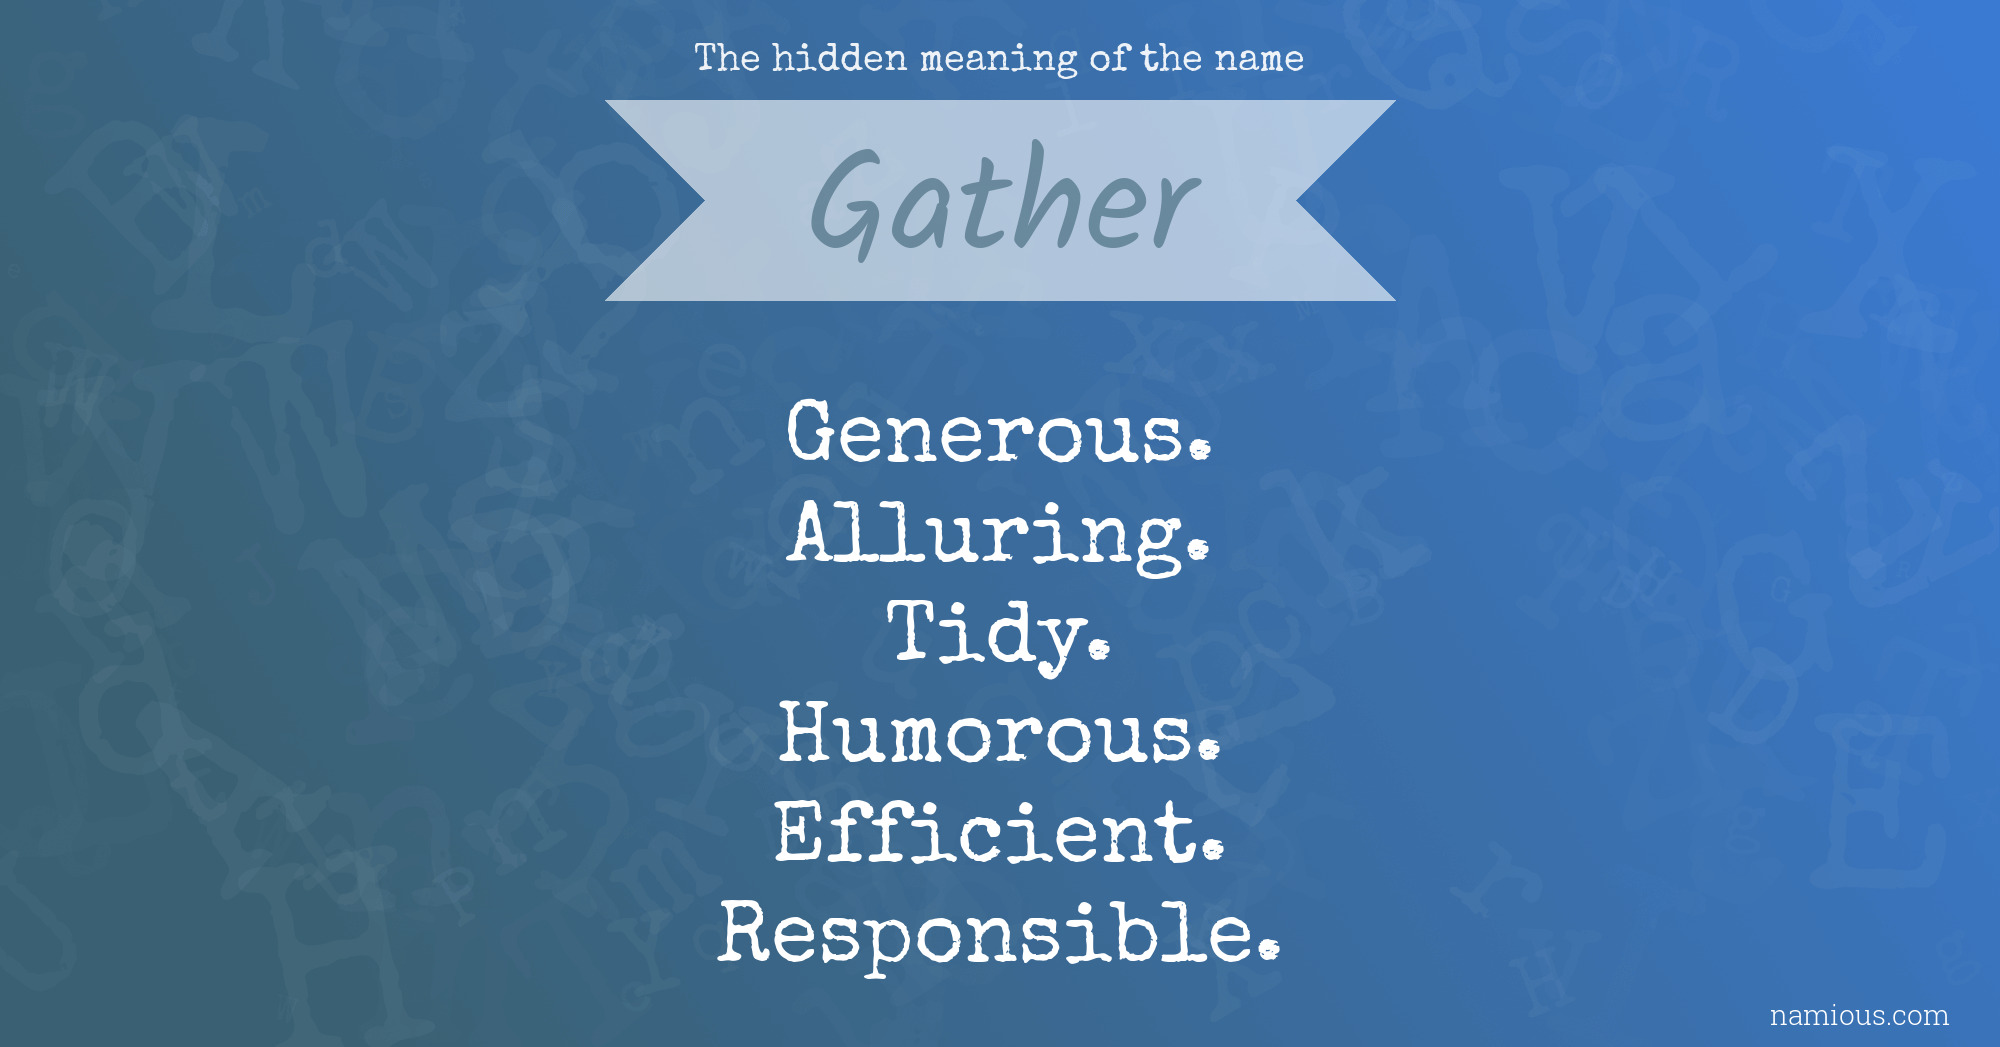 The hidden meaning of the name Gather